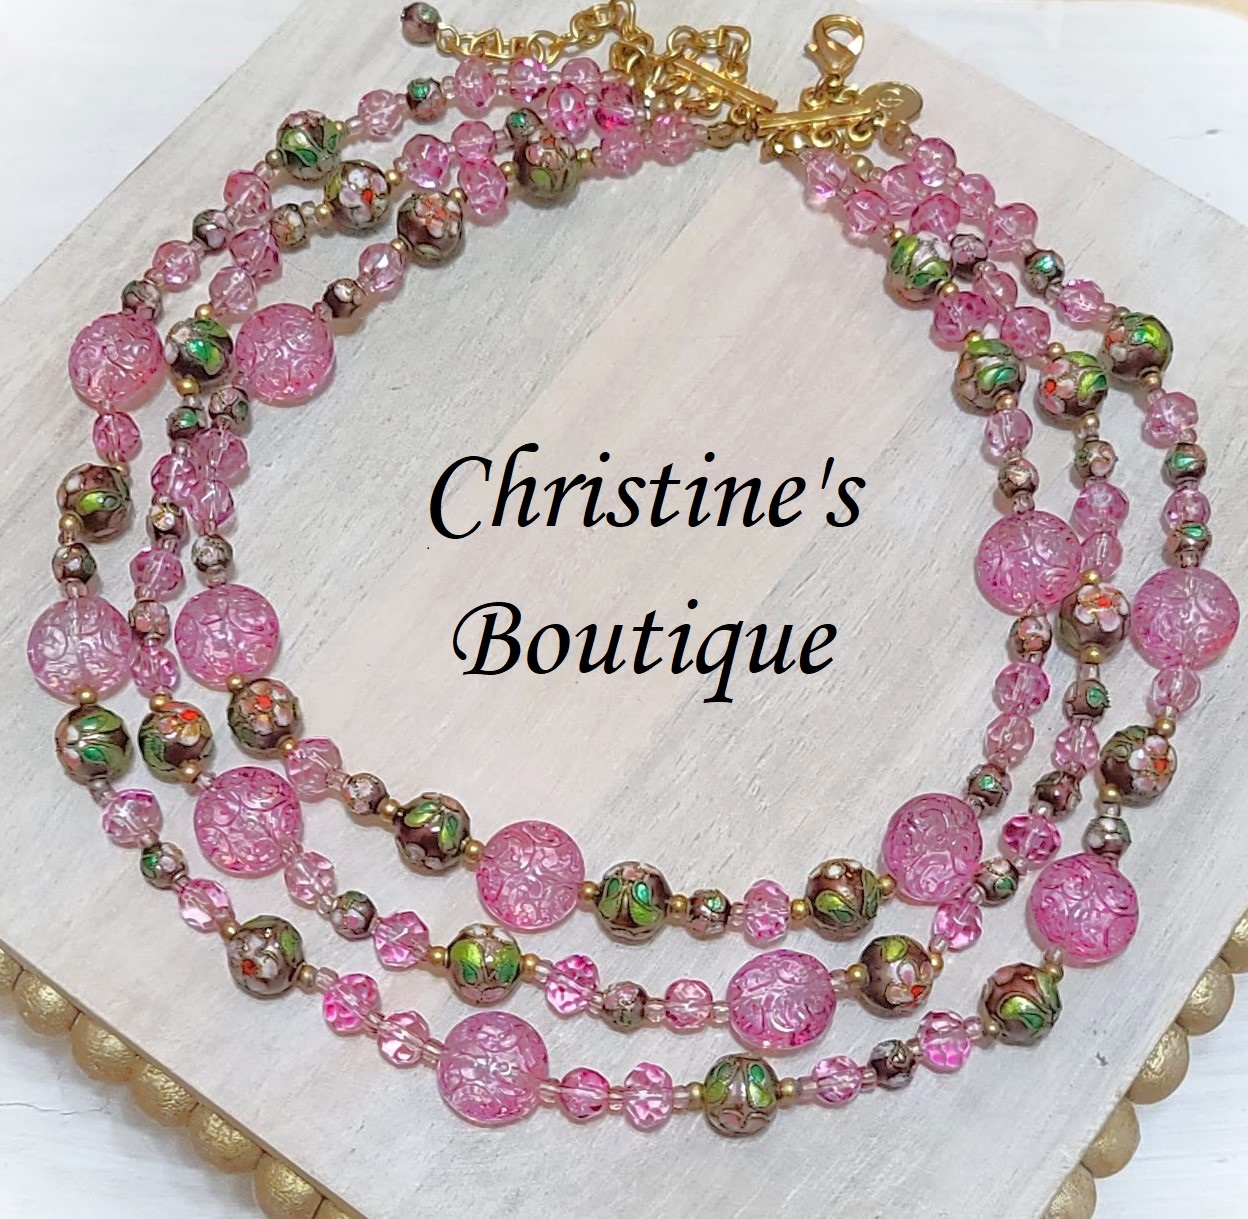 Etched pink glass and cloisonne 3 strand vintage necklace